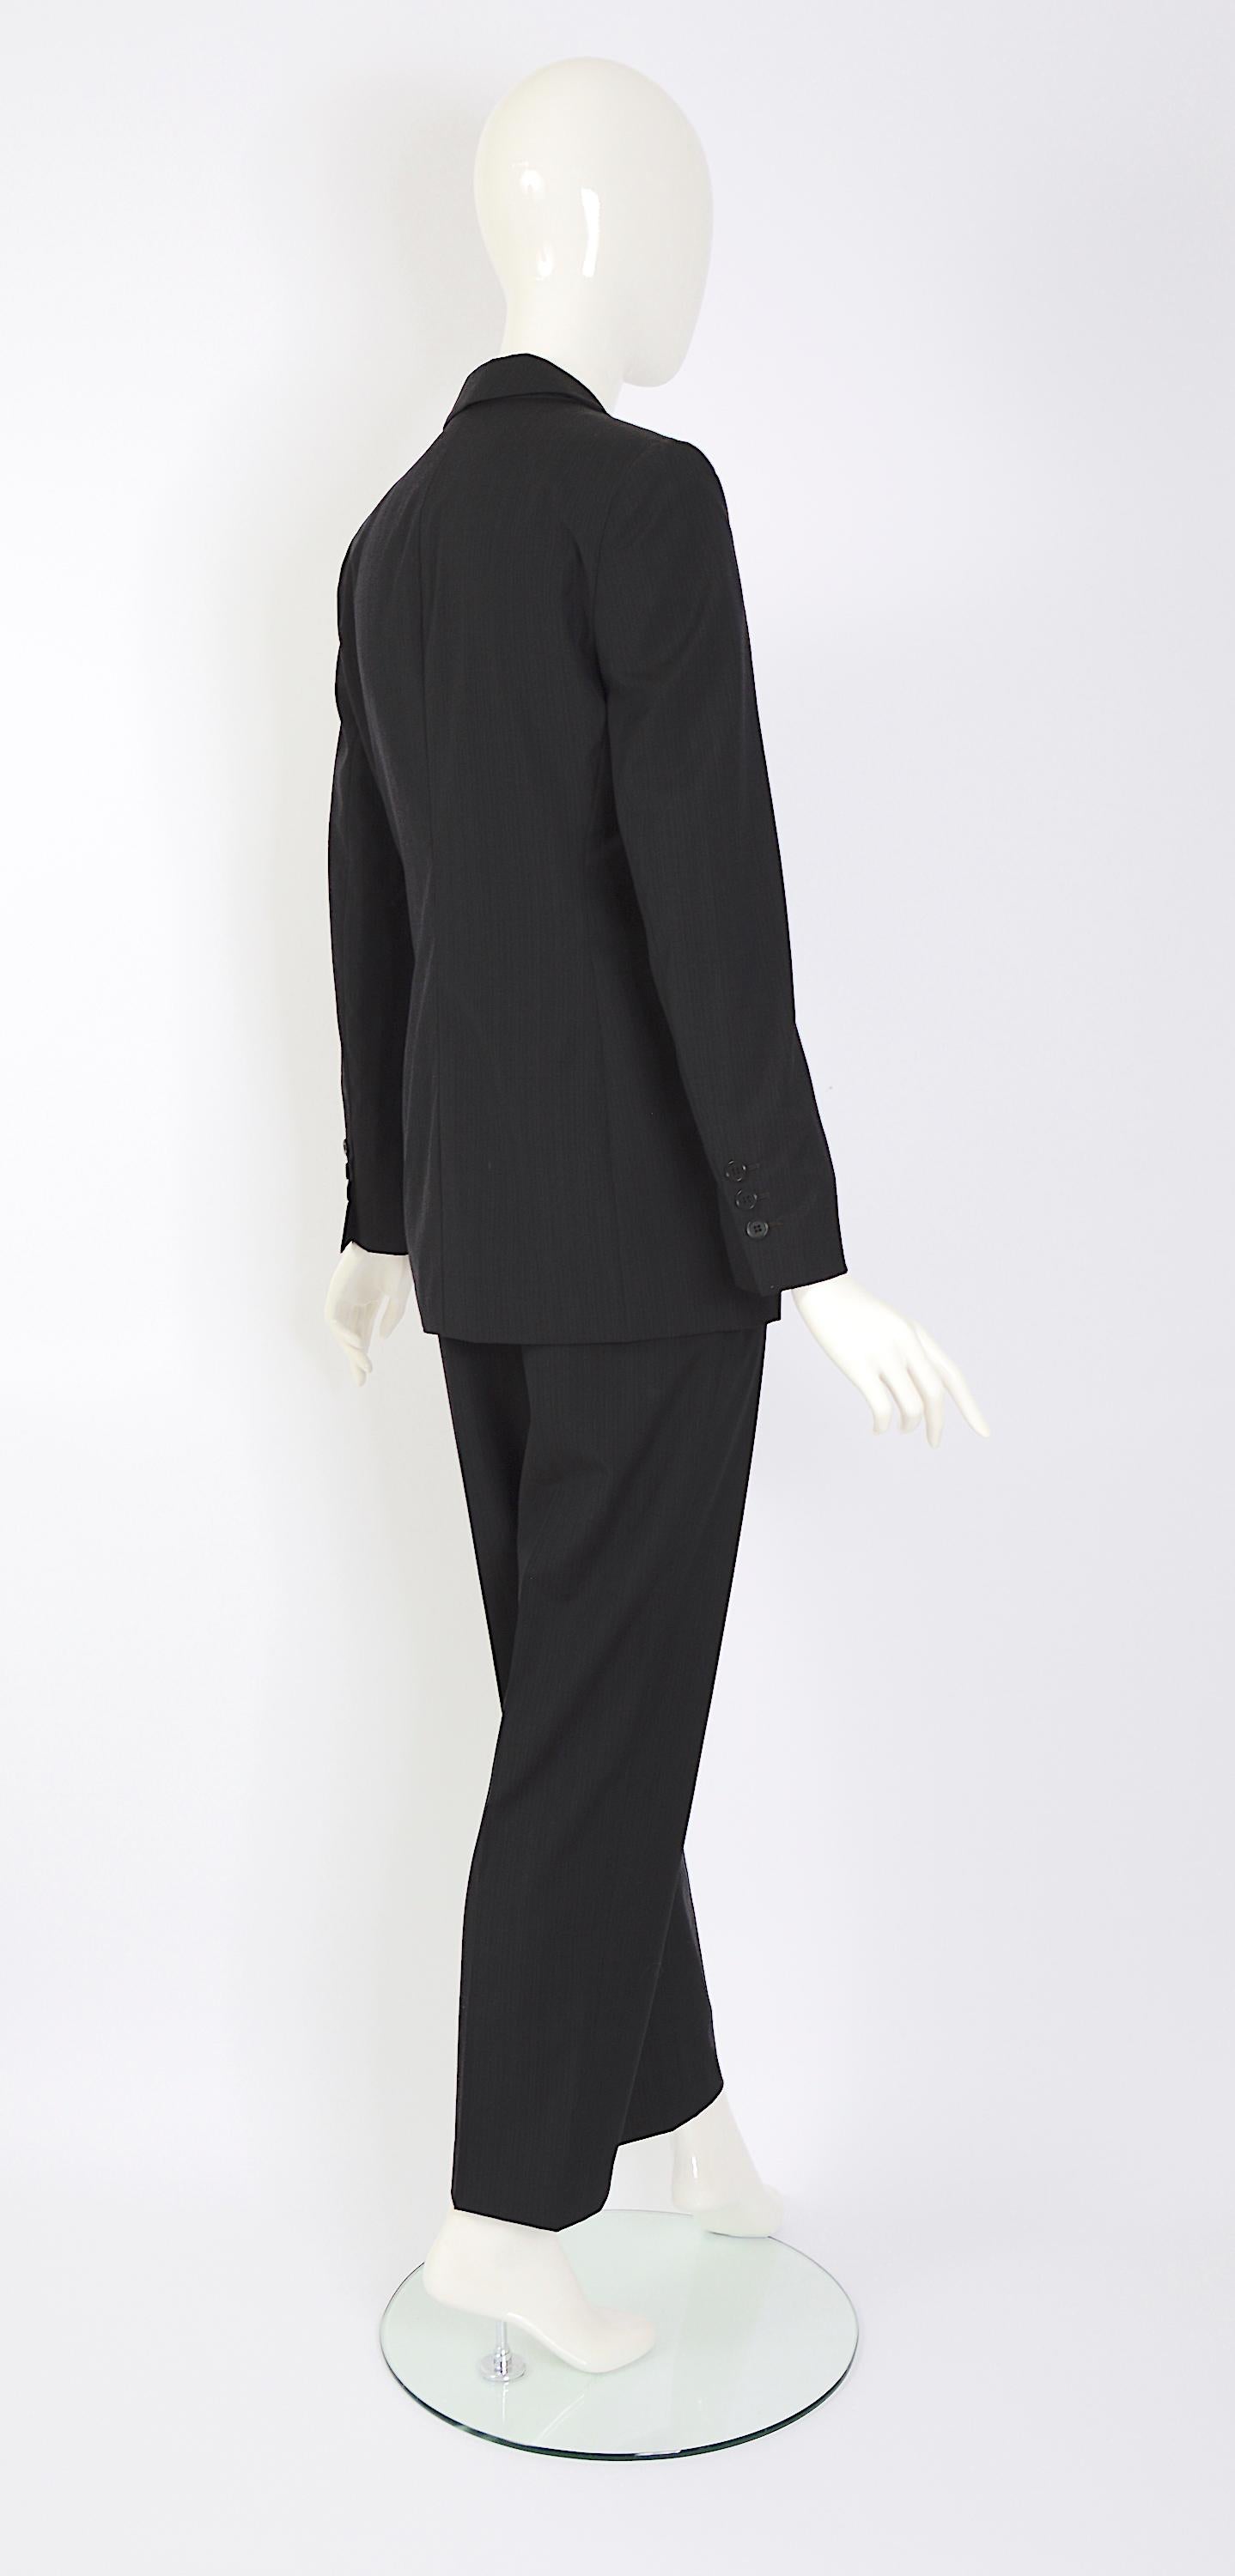 Calvin Klein collection by Calvin Klein vintage 1990's tailored pin stripe suit For Sale 1